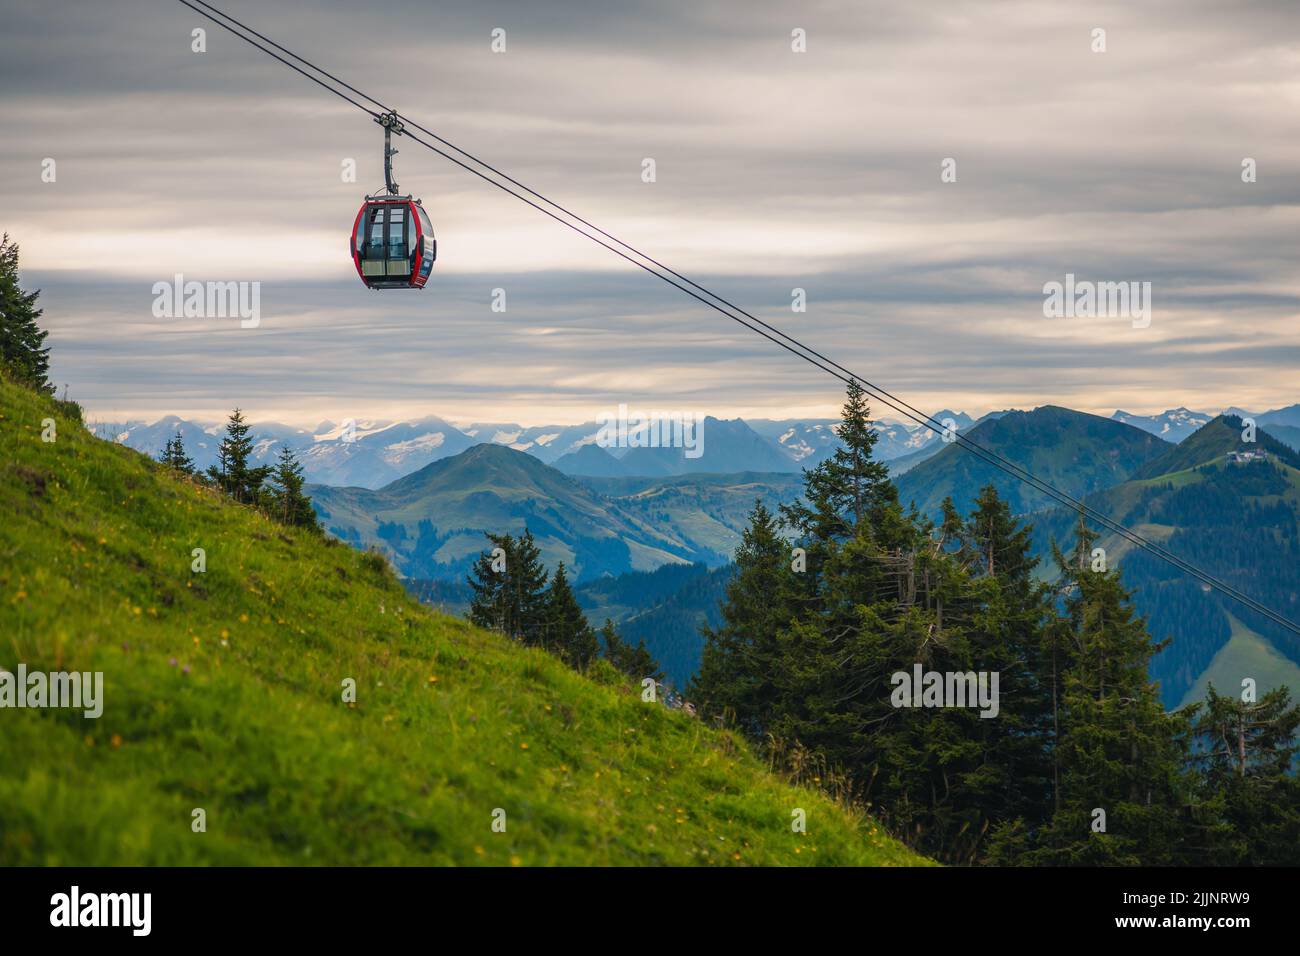 An aerial lift in the hills above the gorge with a mesmerizing view Stock Photo